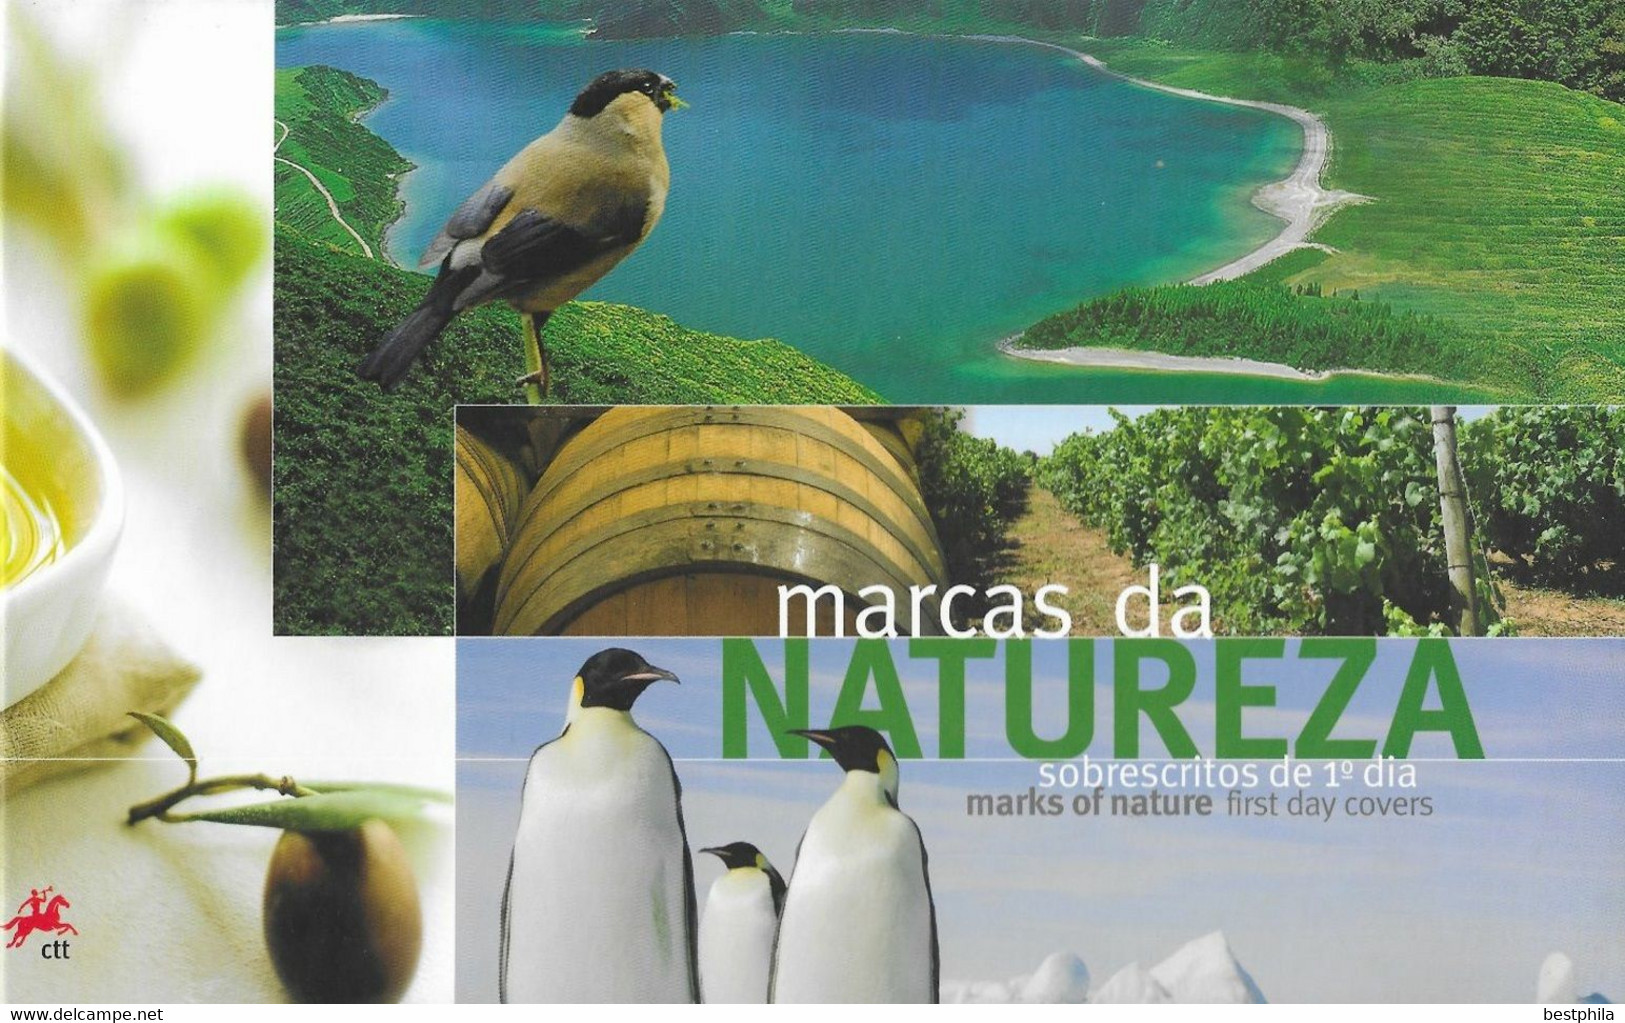 Portugal - 2008 - There are 5 Different of FDC in the Special Book - (See 7 Scan) - It looks so clean